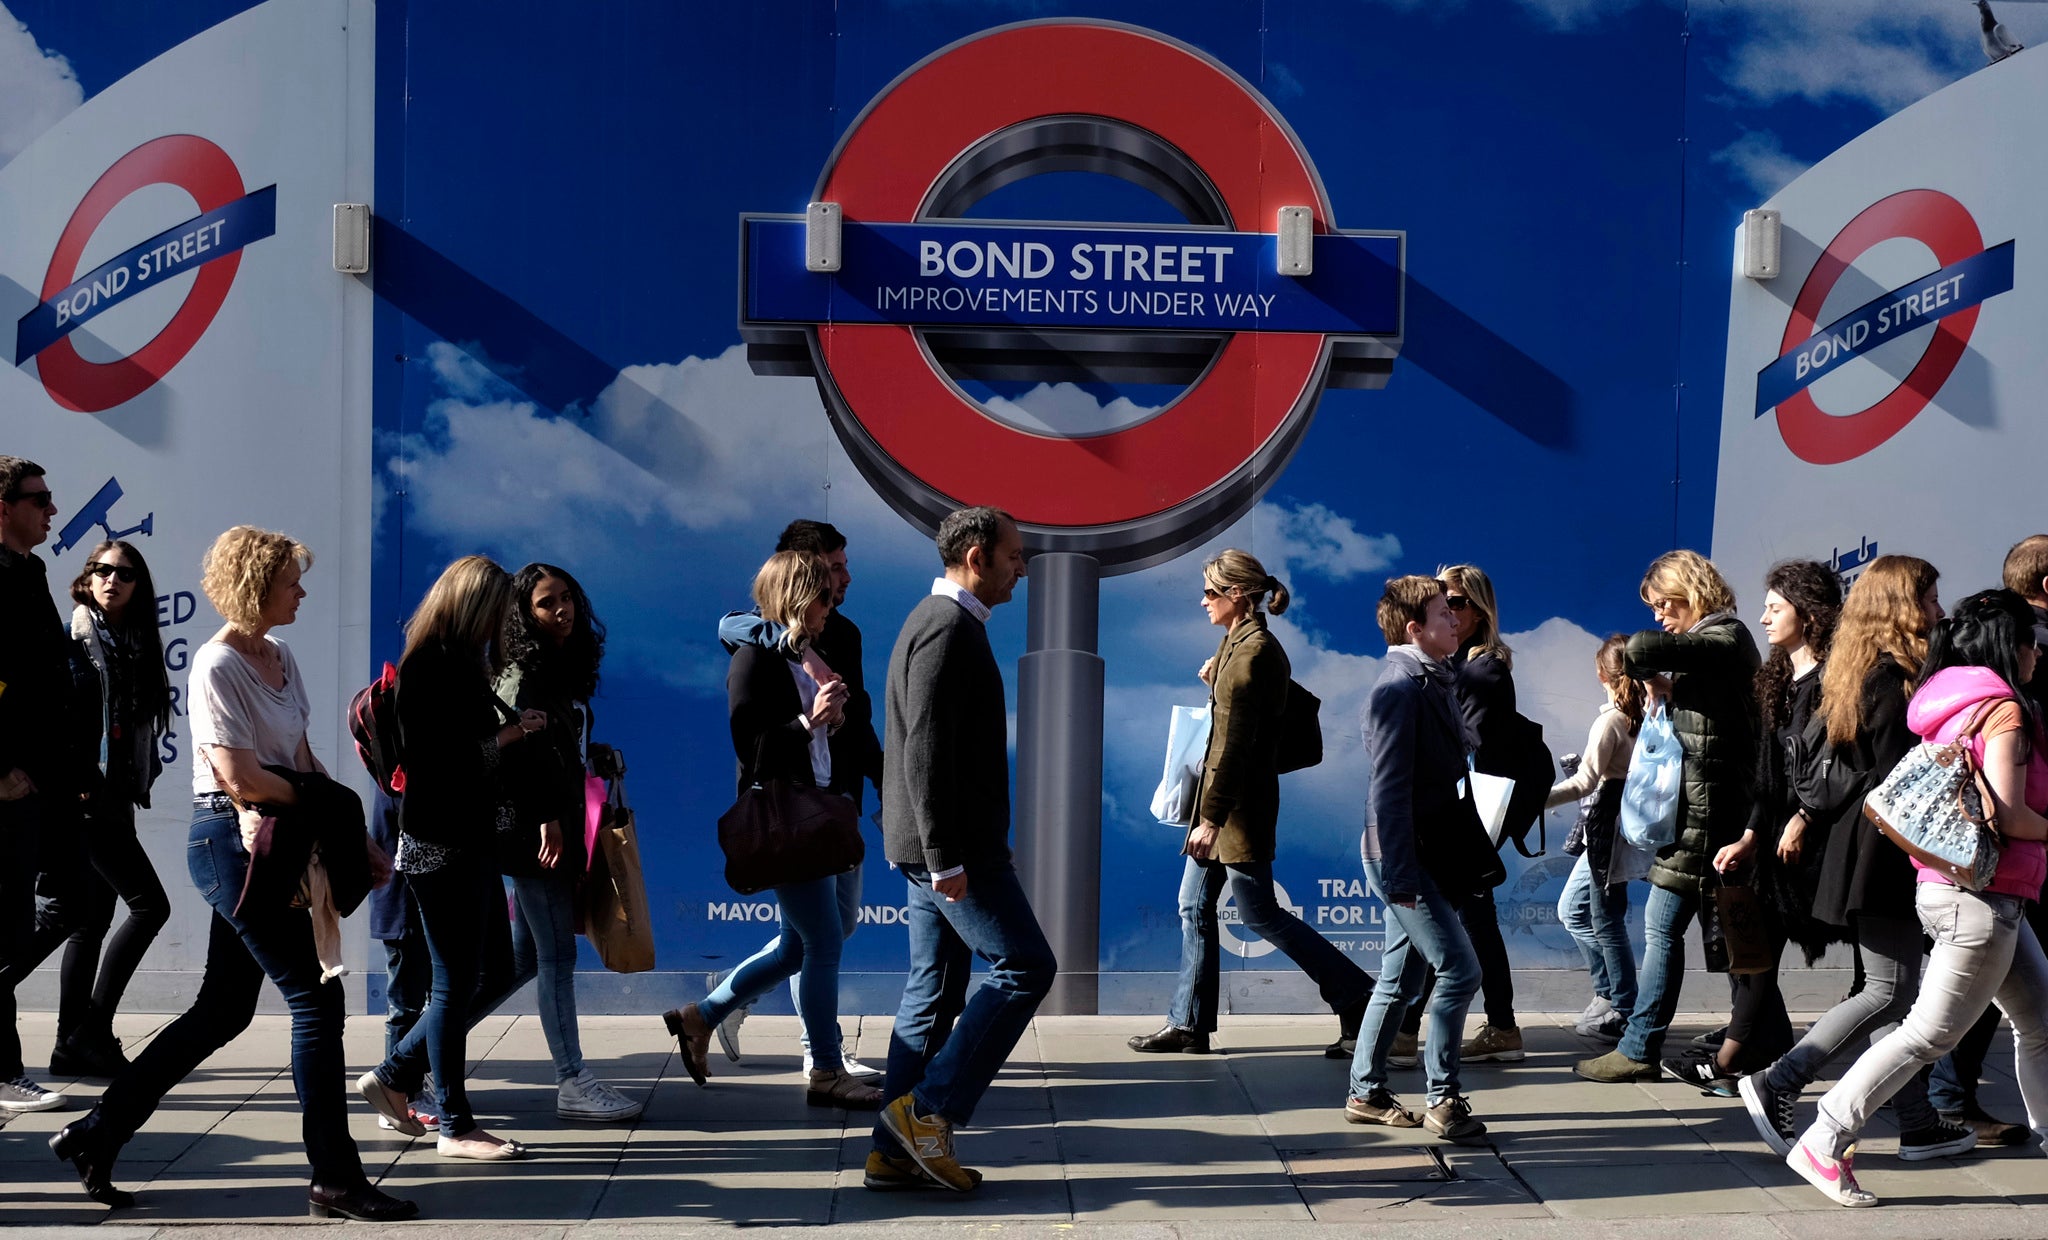 The Central and Waterloo & City tube lines are "severely affected" by a strike today